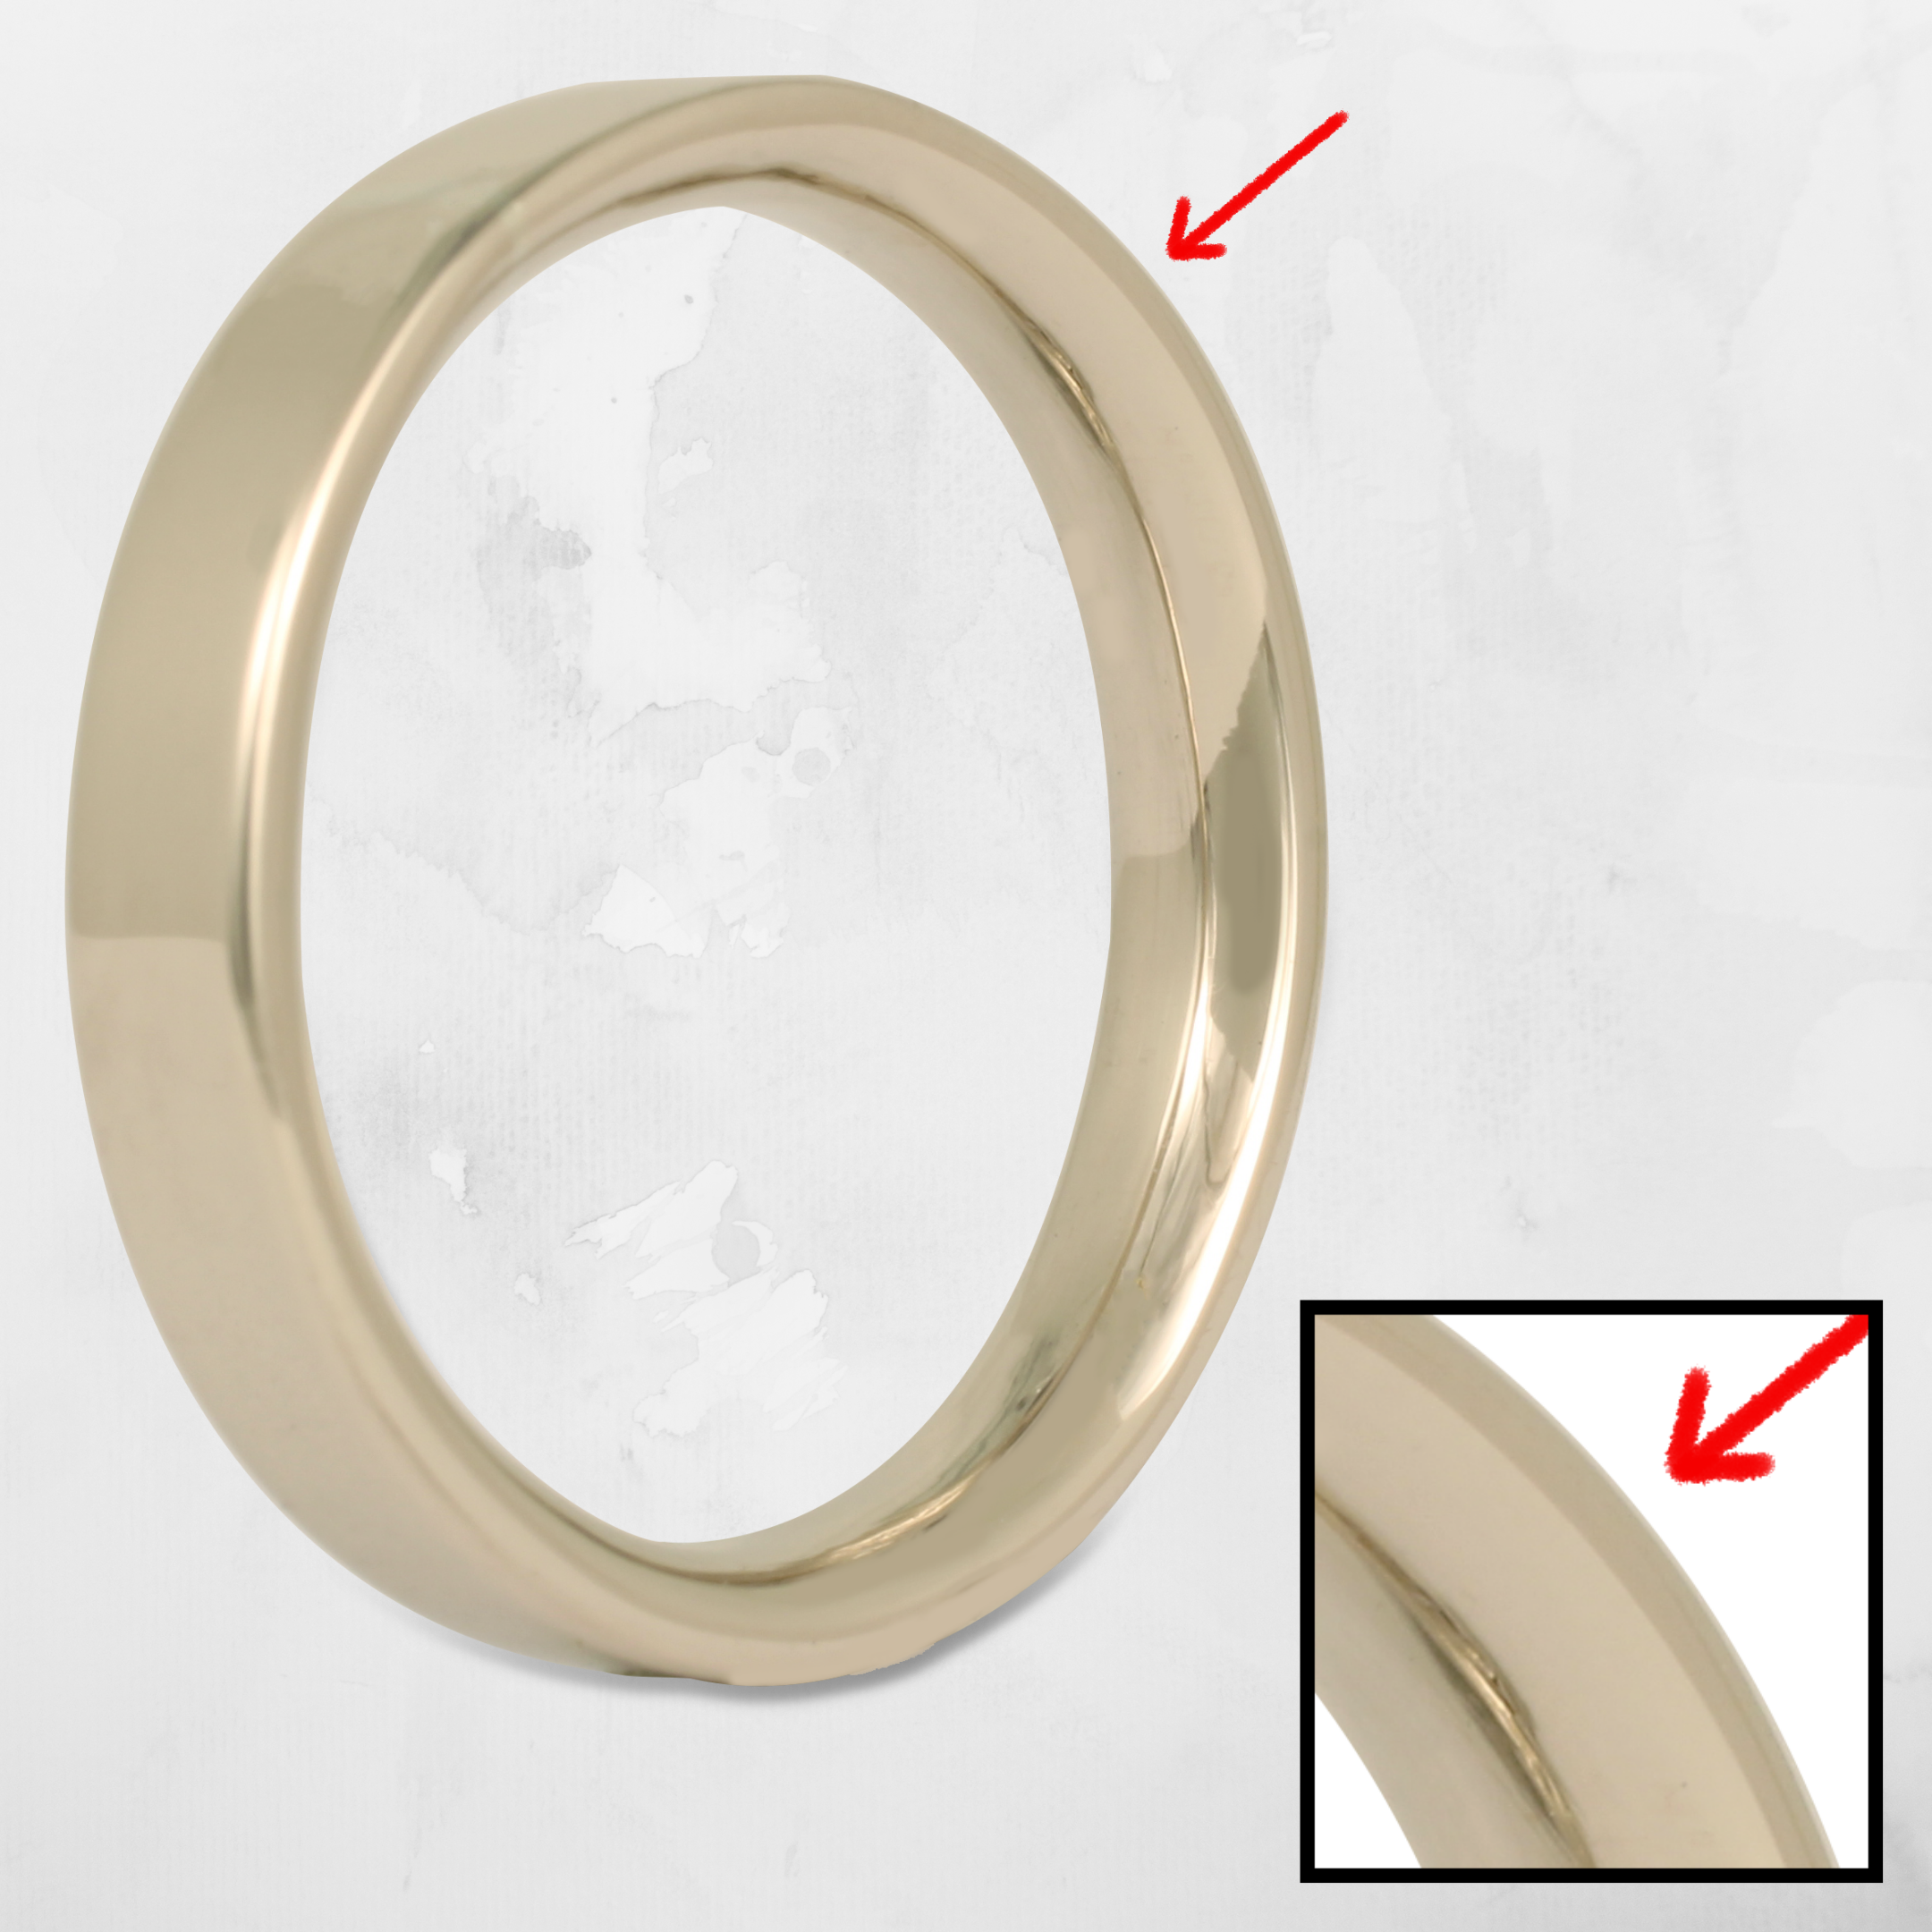 https://reflectivejewelry.com/BlogNews/images/Original/Comfort%20Fit%20White%20Gold%20Zoom.png